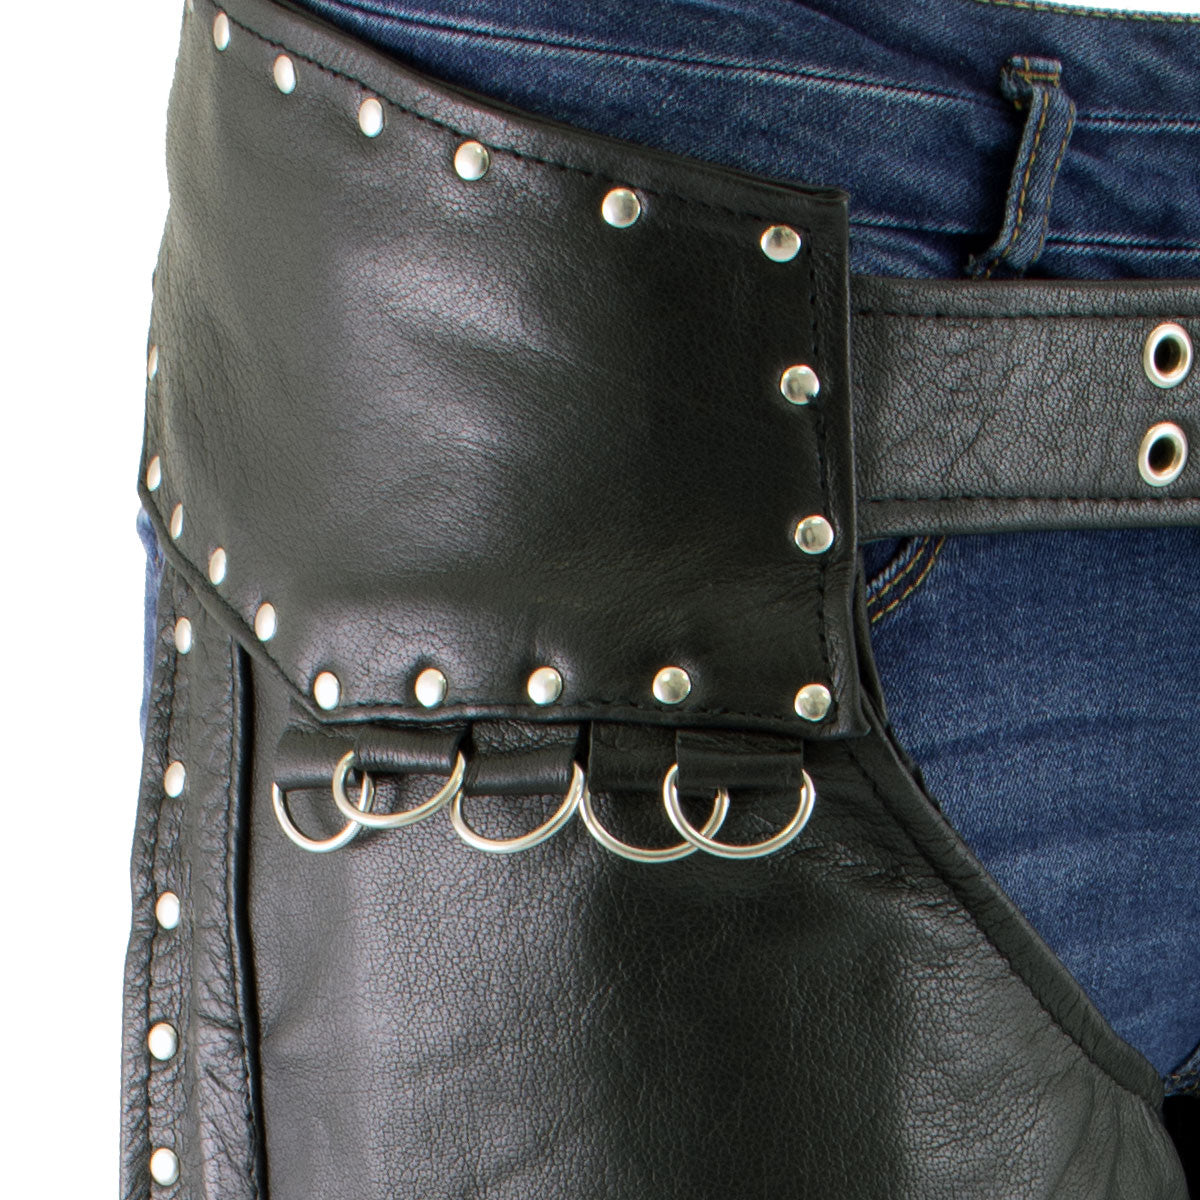 Xelement XS7590 Women's 'Riveted' Classic Black Leather Motorcycle Biker Rider Chaps